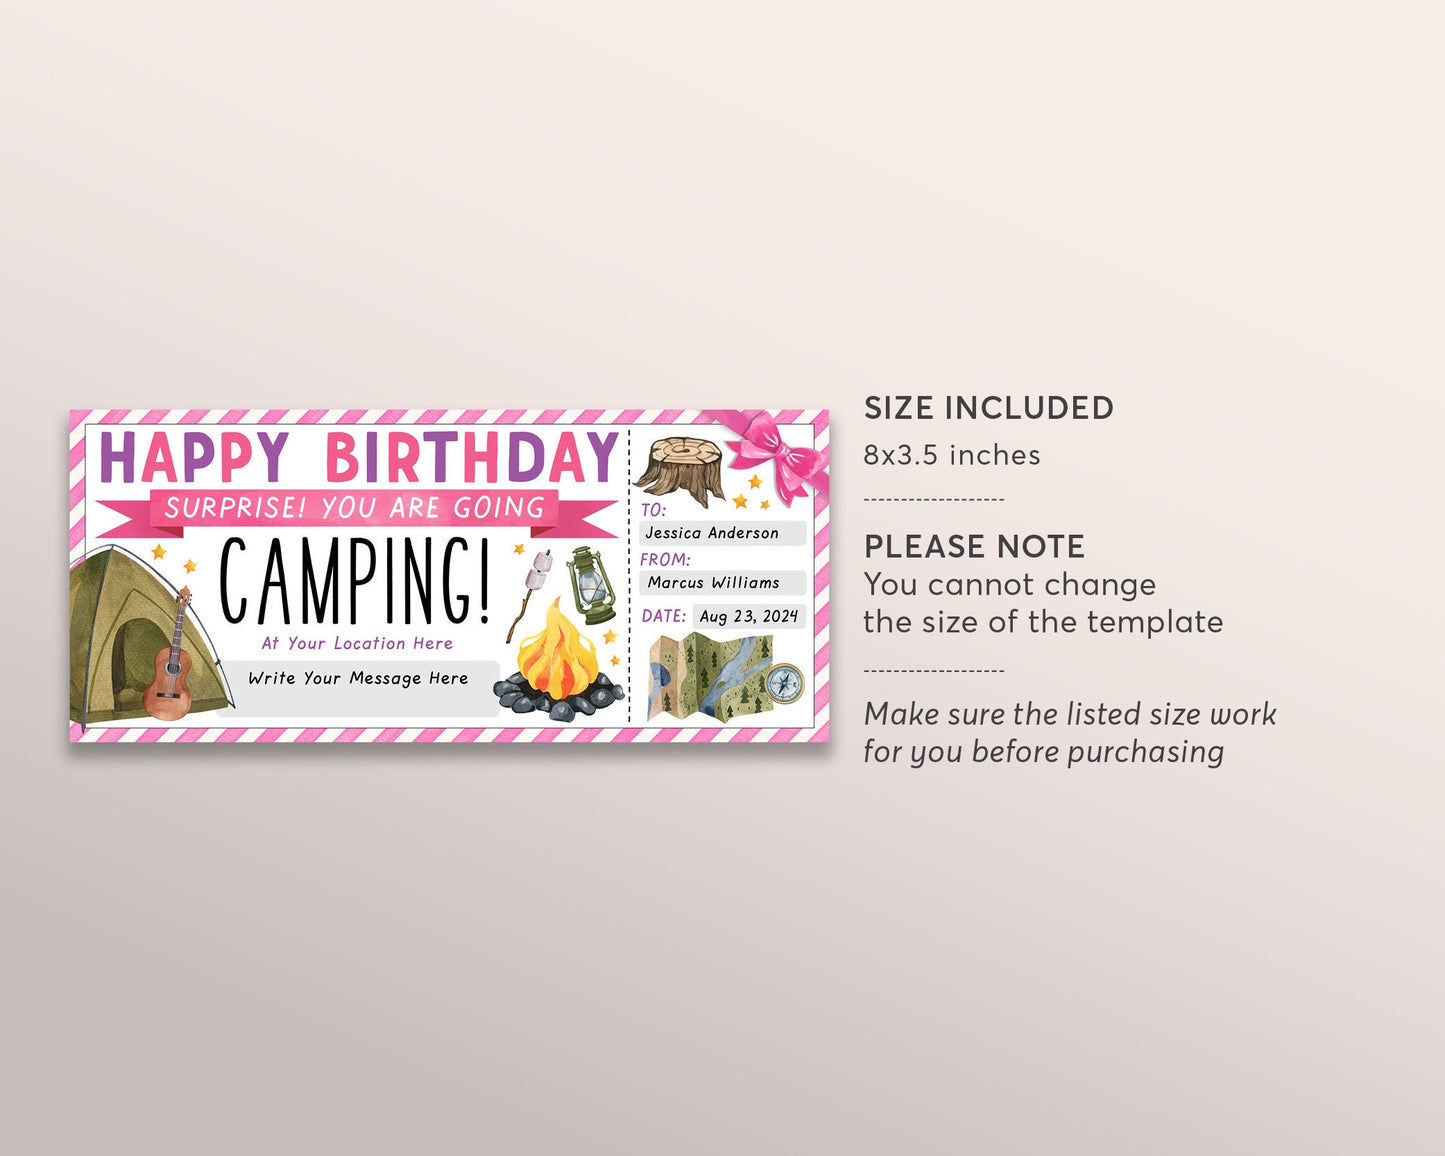 Camping Trip Ticket Editable Template, Birthday Weekend Trip Reveal Gift Certificate For Her, Wilderness Hiking Experience Voucher Coupon